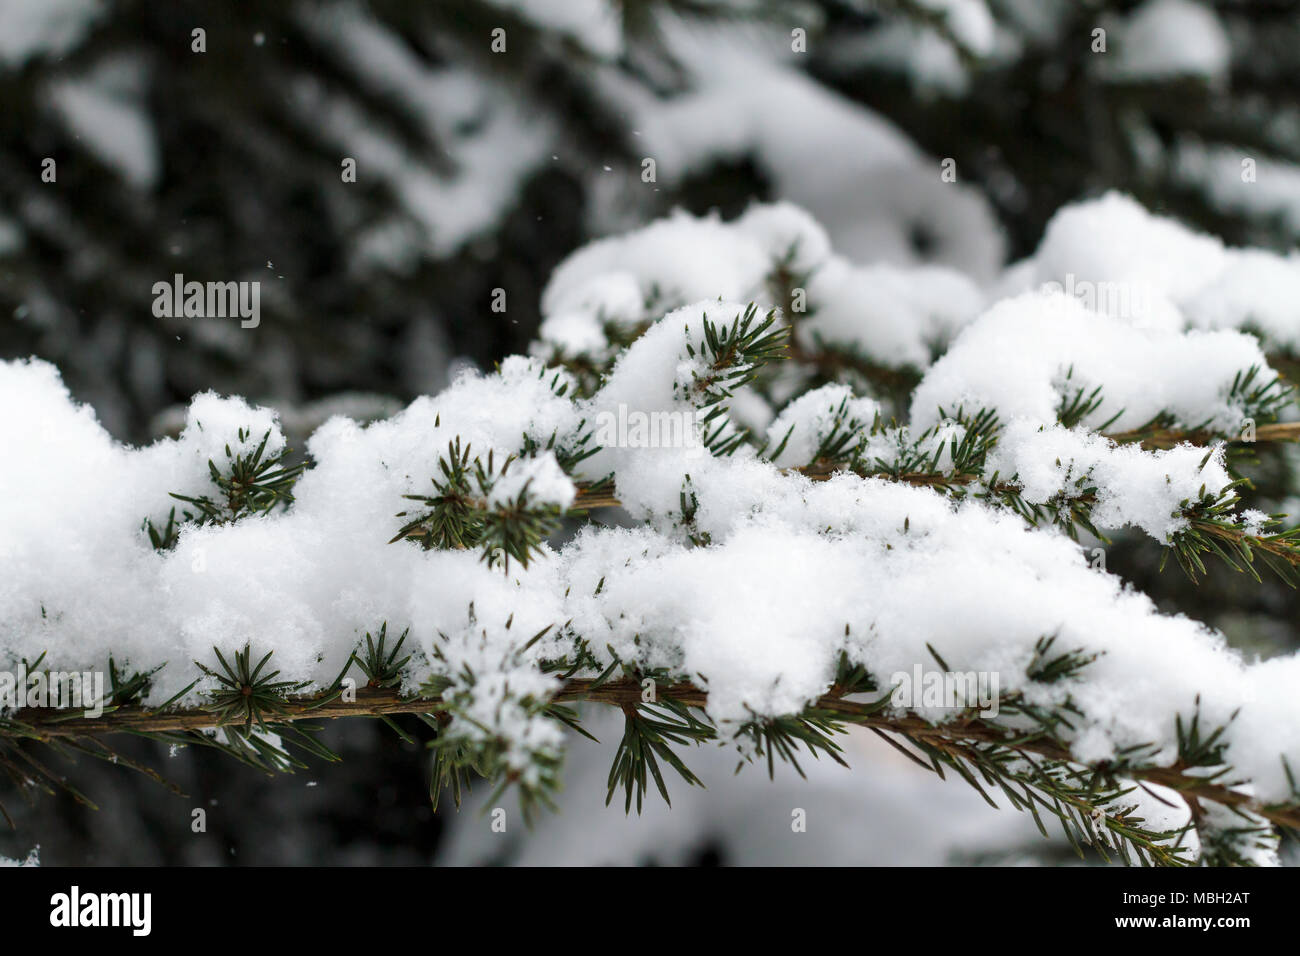 Evergreen branches on white Stock Photo by ©Nataly-Nete 174071470